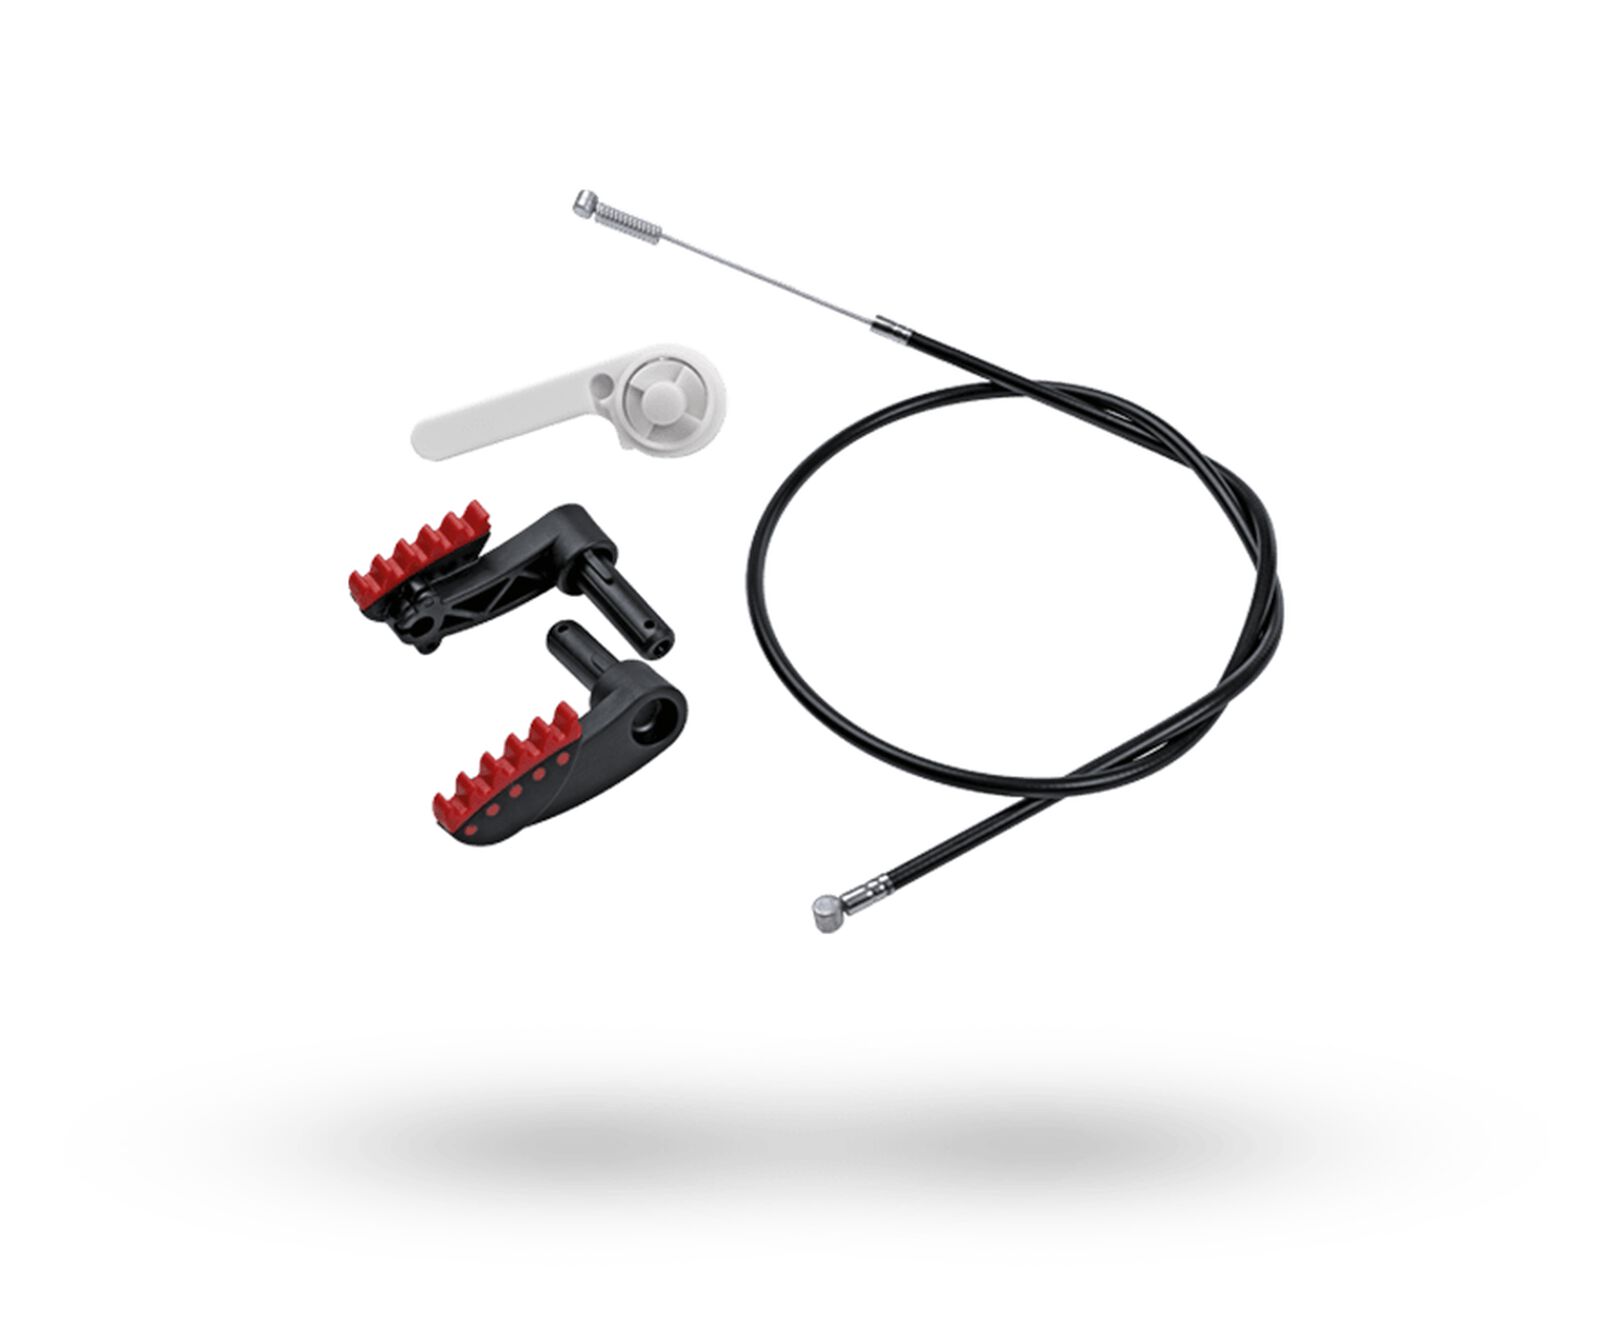 Bugaboo Cameleon 3 brake cable service set - View 1